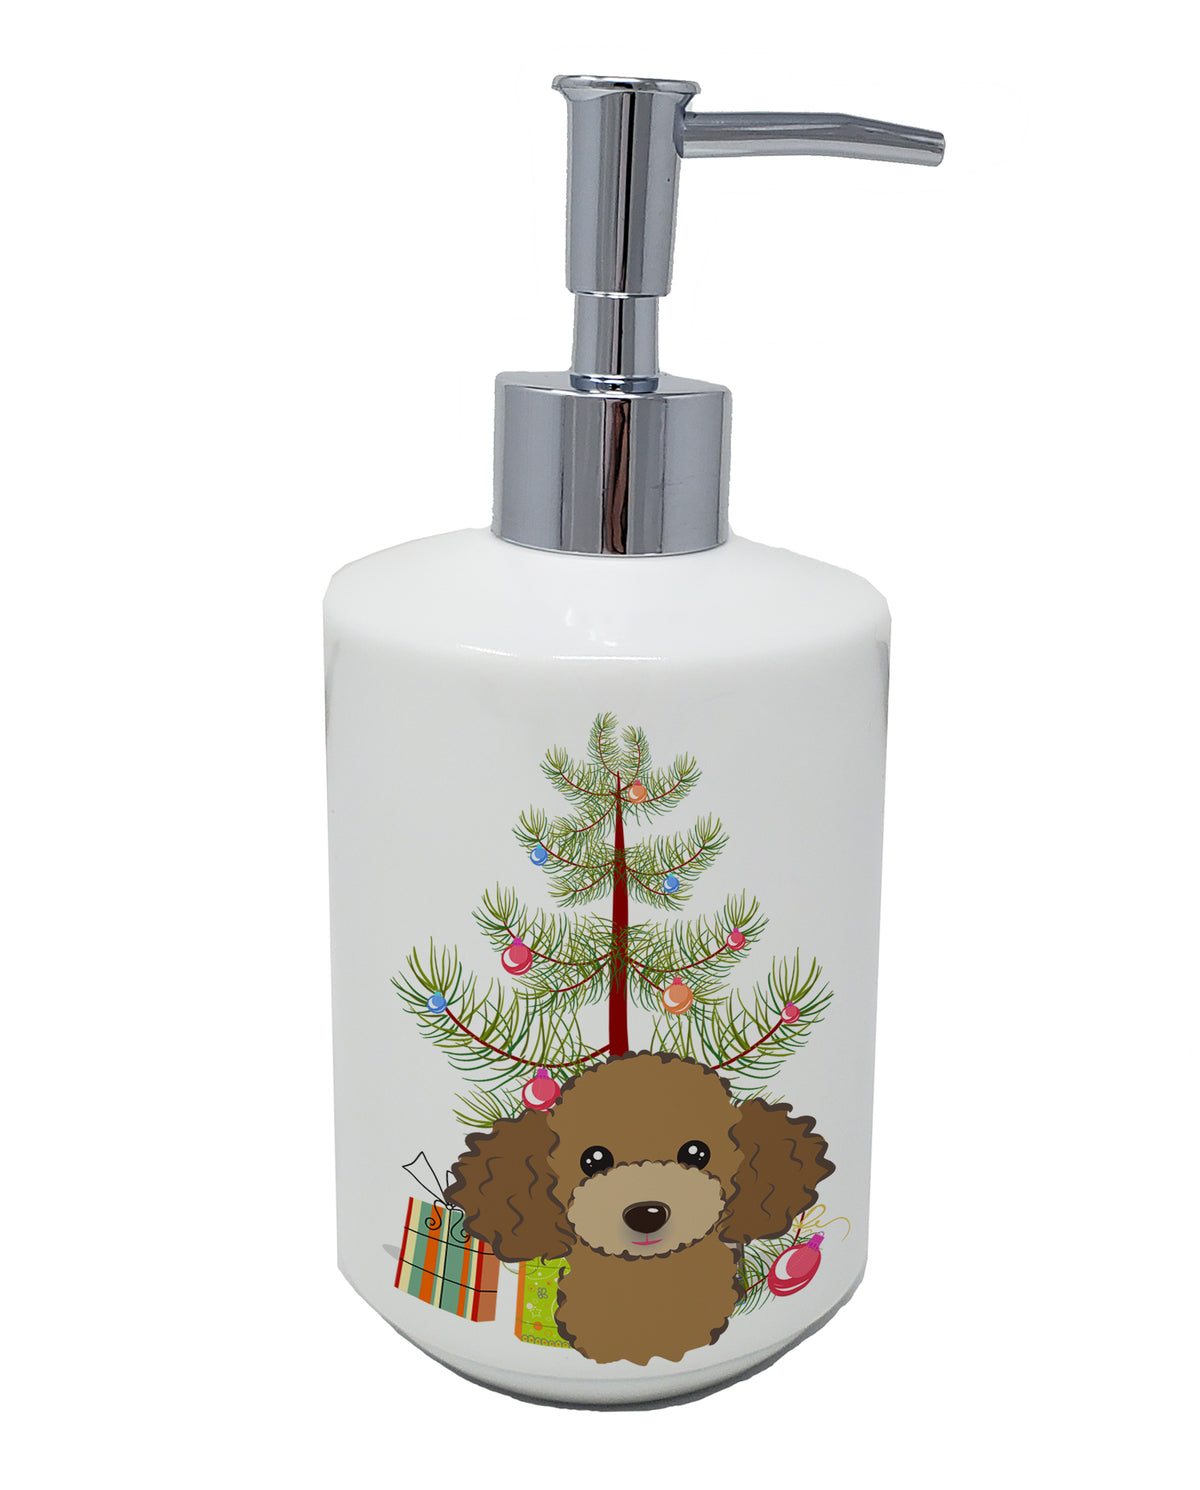 Buy this Christmas Tree and Chocolate Brown Poodle Ceramic Soap Dispenser